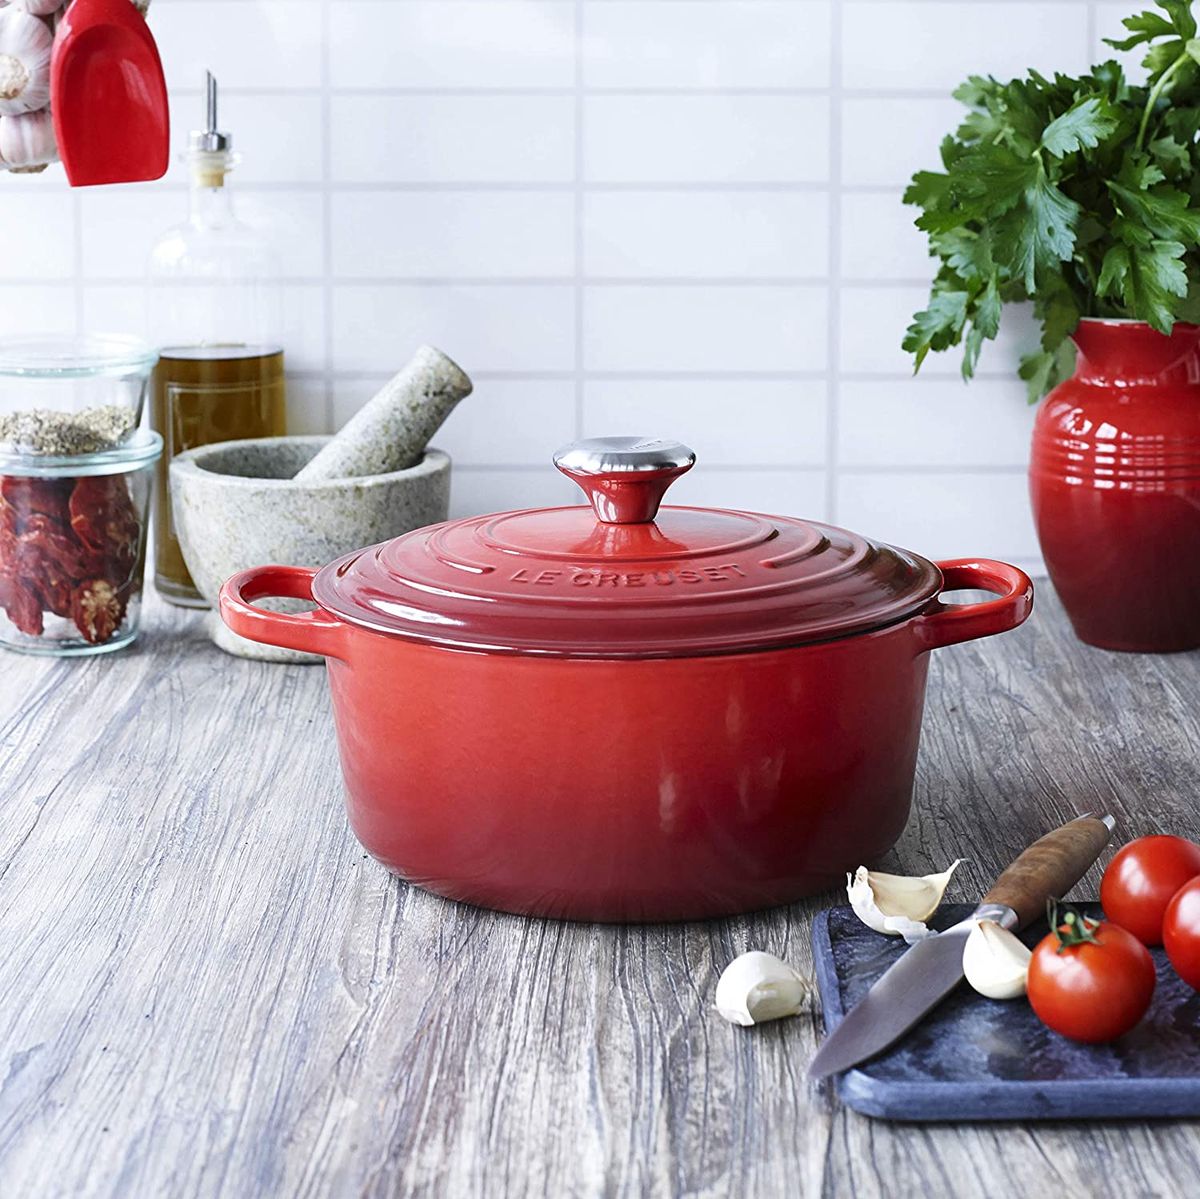 https://hips.hearstapps.com/hmg-prod/images/le-creuset-amazon-prime-day-1657624969.jpg?crop=1.00xw:1.00xh;0,0&resize=1200:*